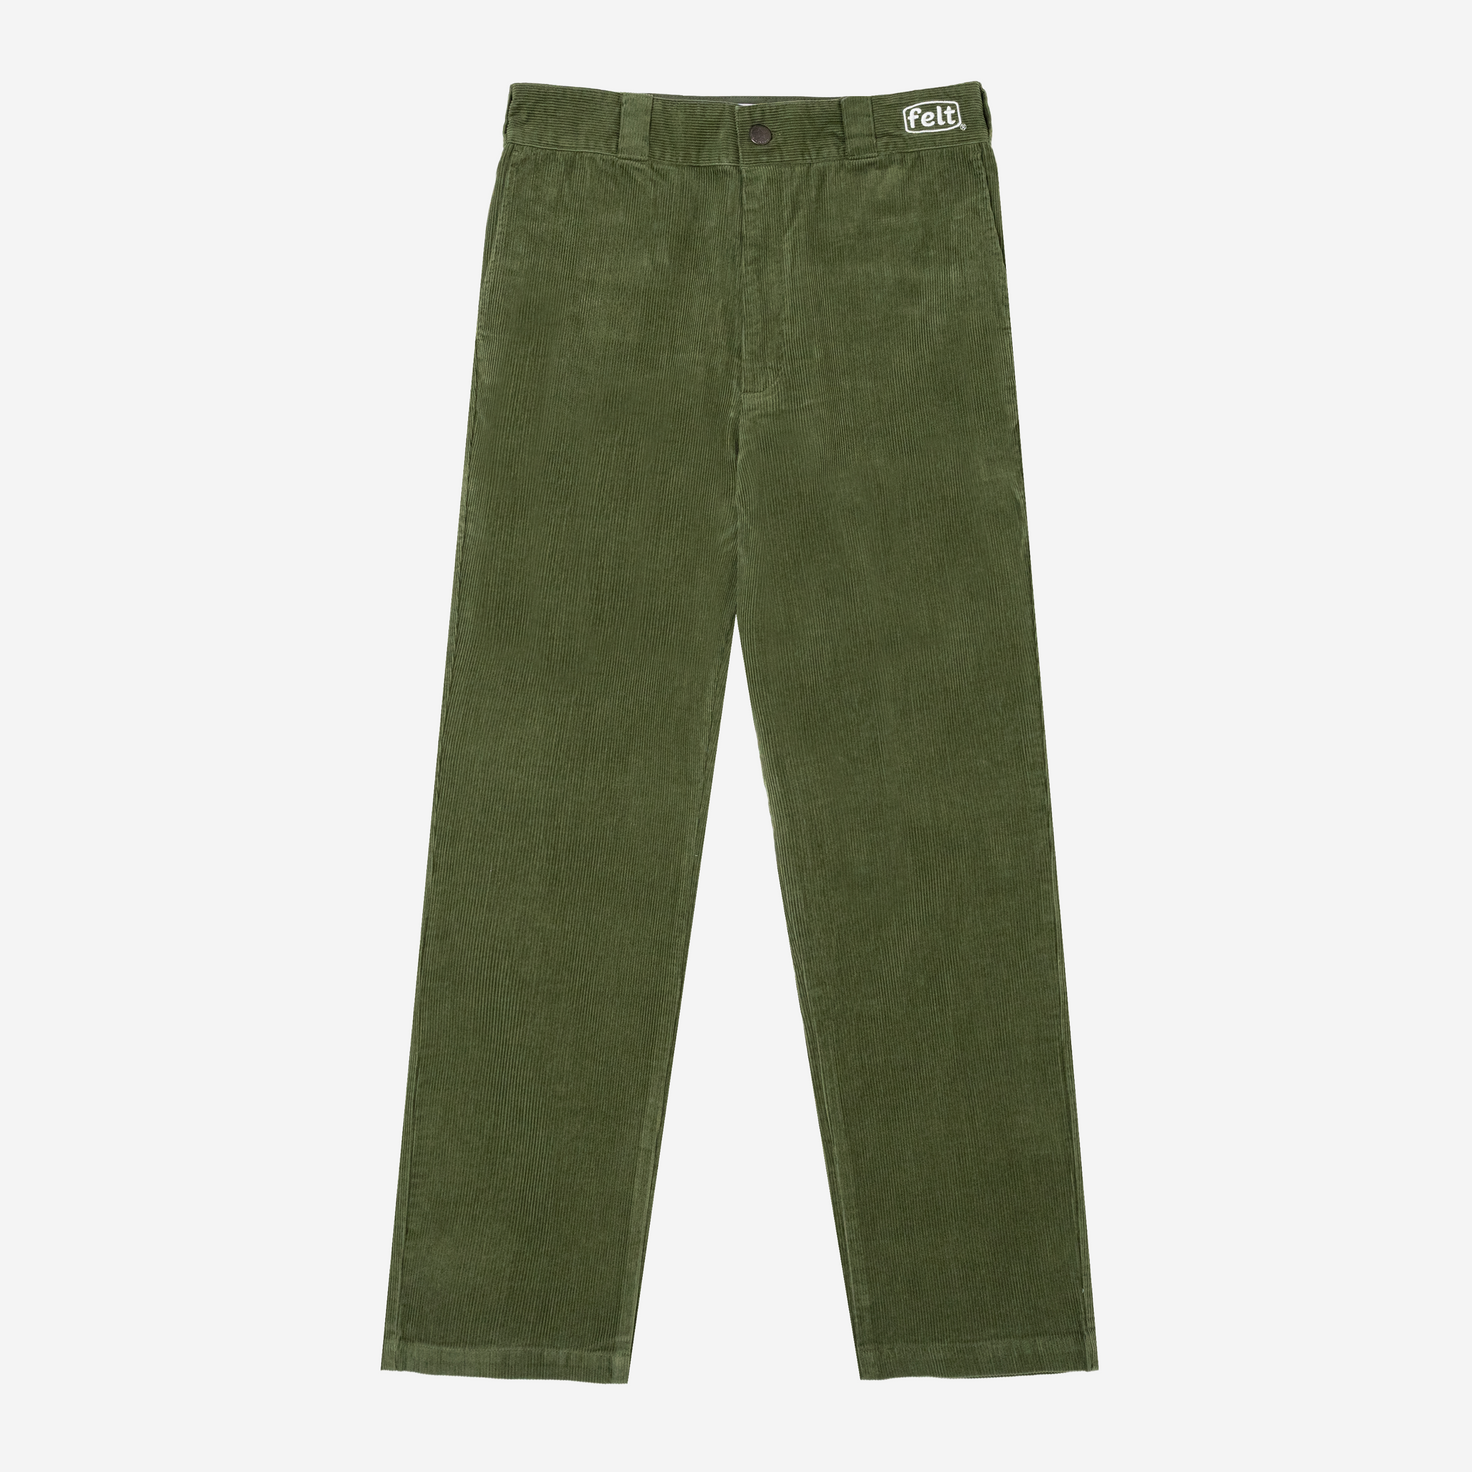 Corduroy Workwear Pants - Felt - For Every Living Thing